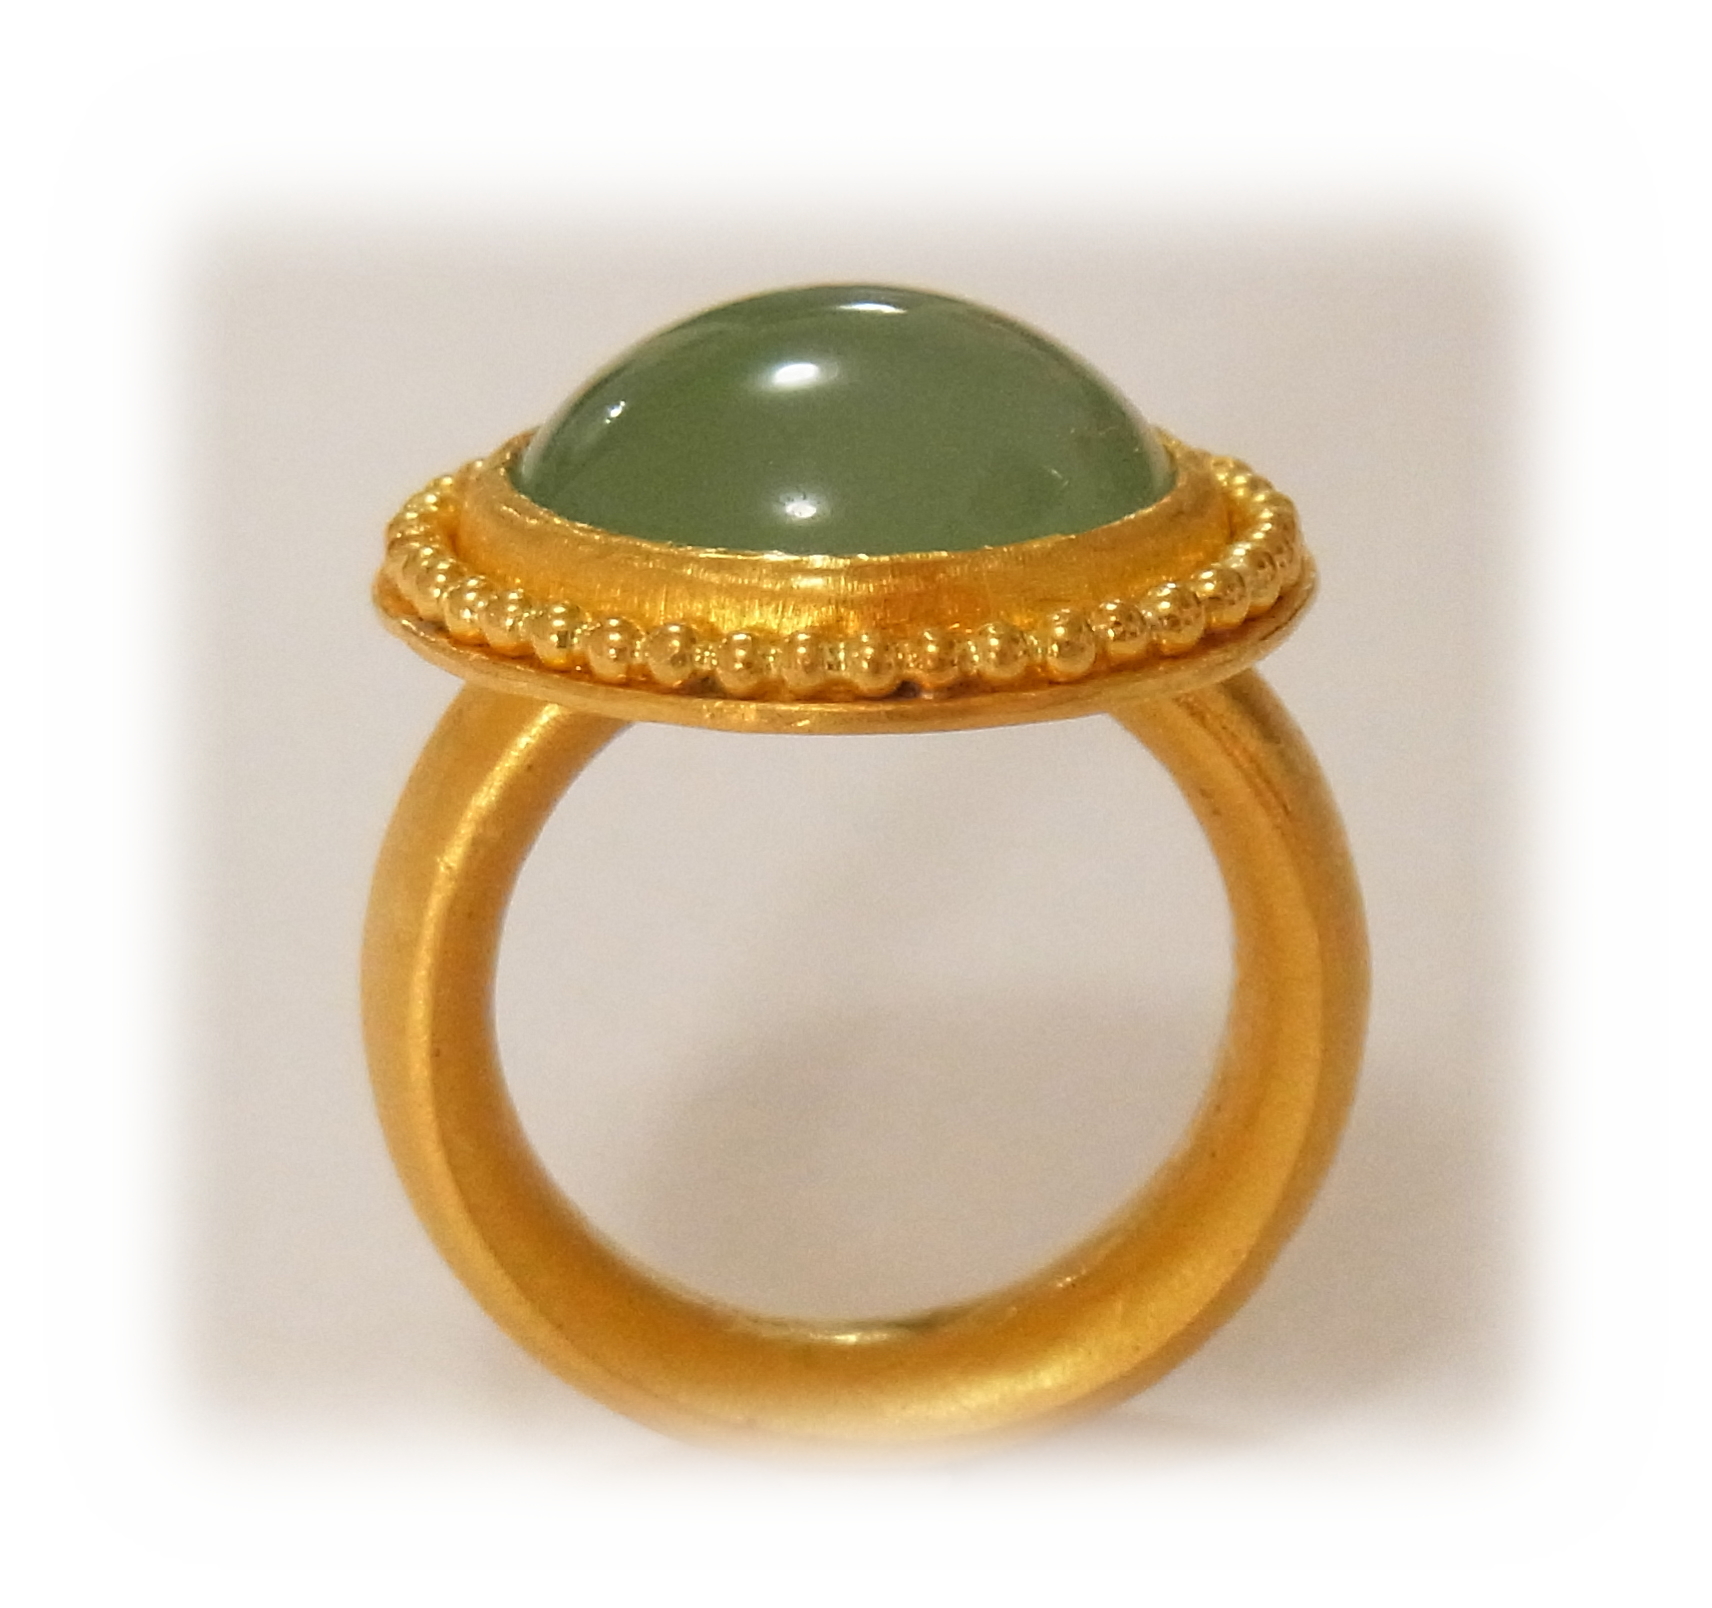 Round-cabochon green Jadeite ring with gold granulation (seen from the front)